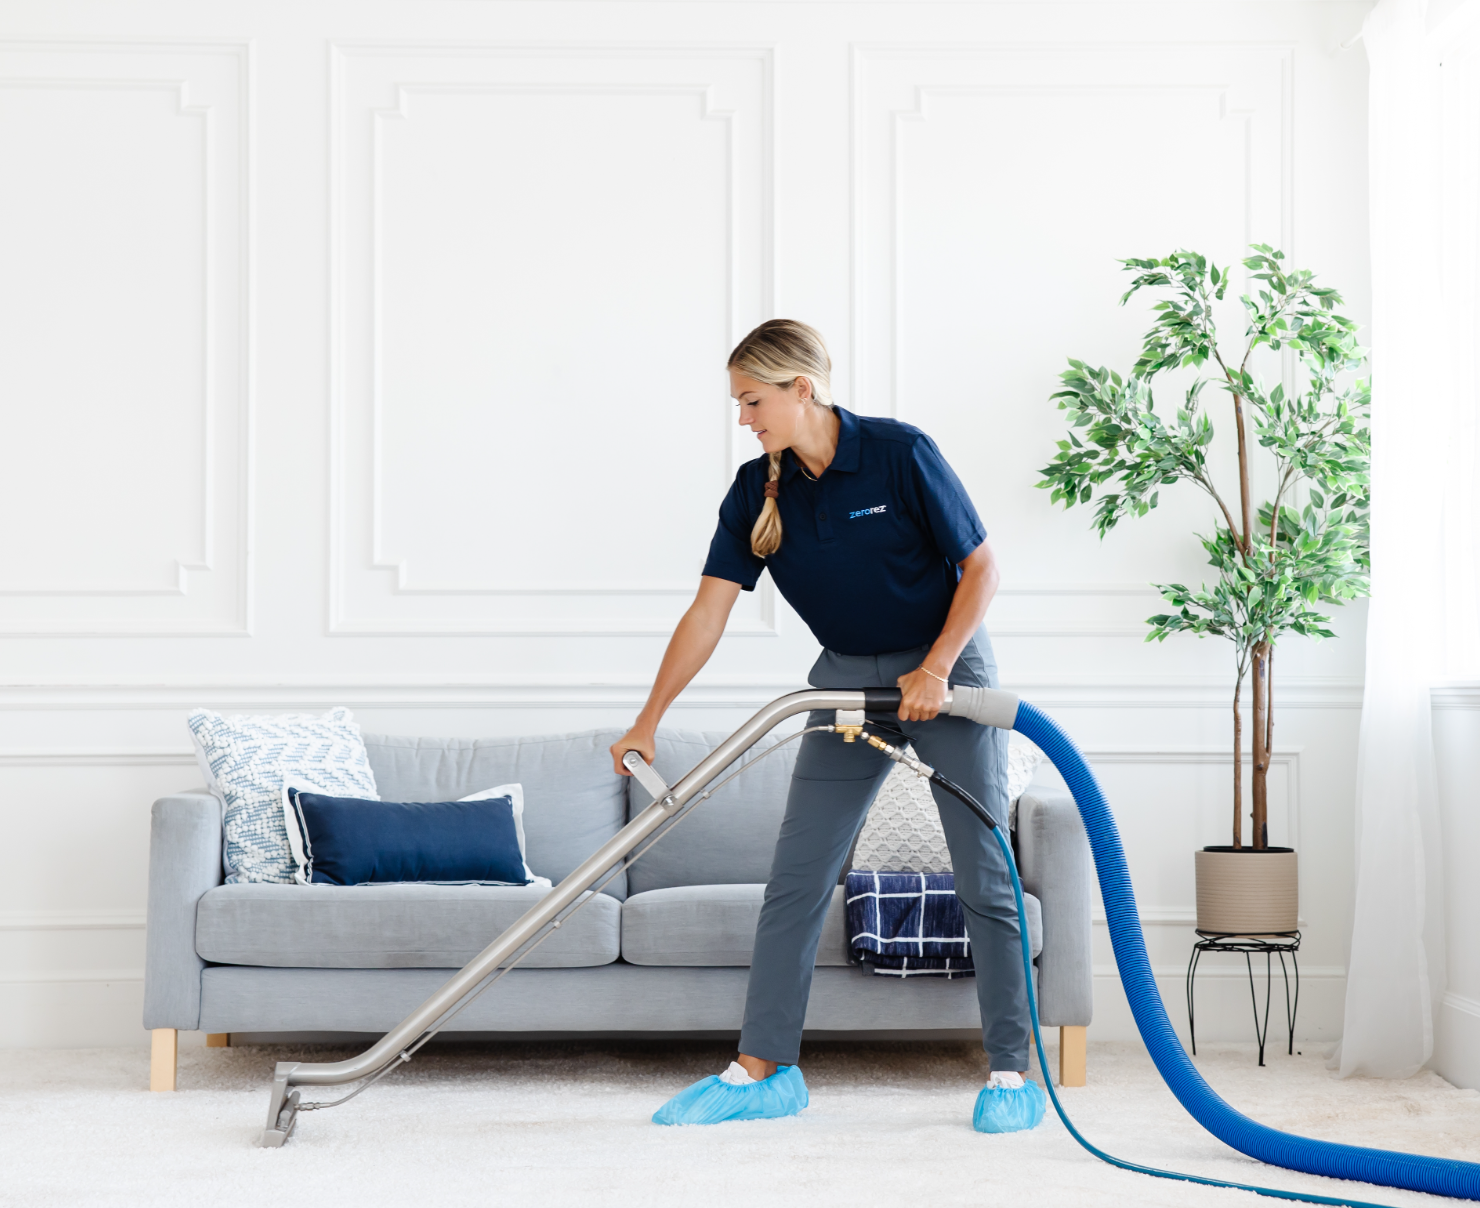 Female Zerorez® technician pulling a Zr® Wand to clean a white carpet with the right temperature water to clean carpets in a living room setting with a couch and tree